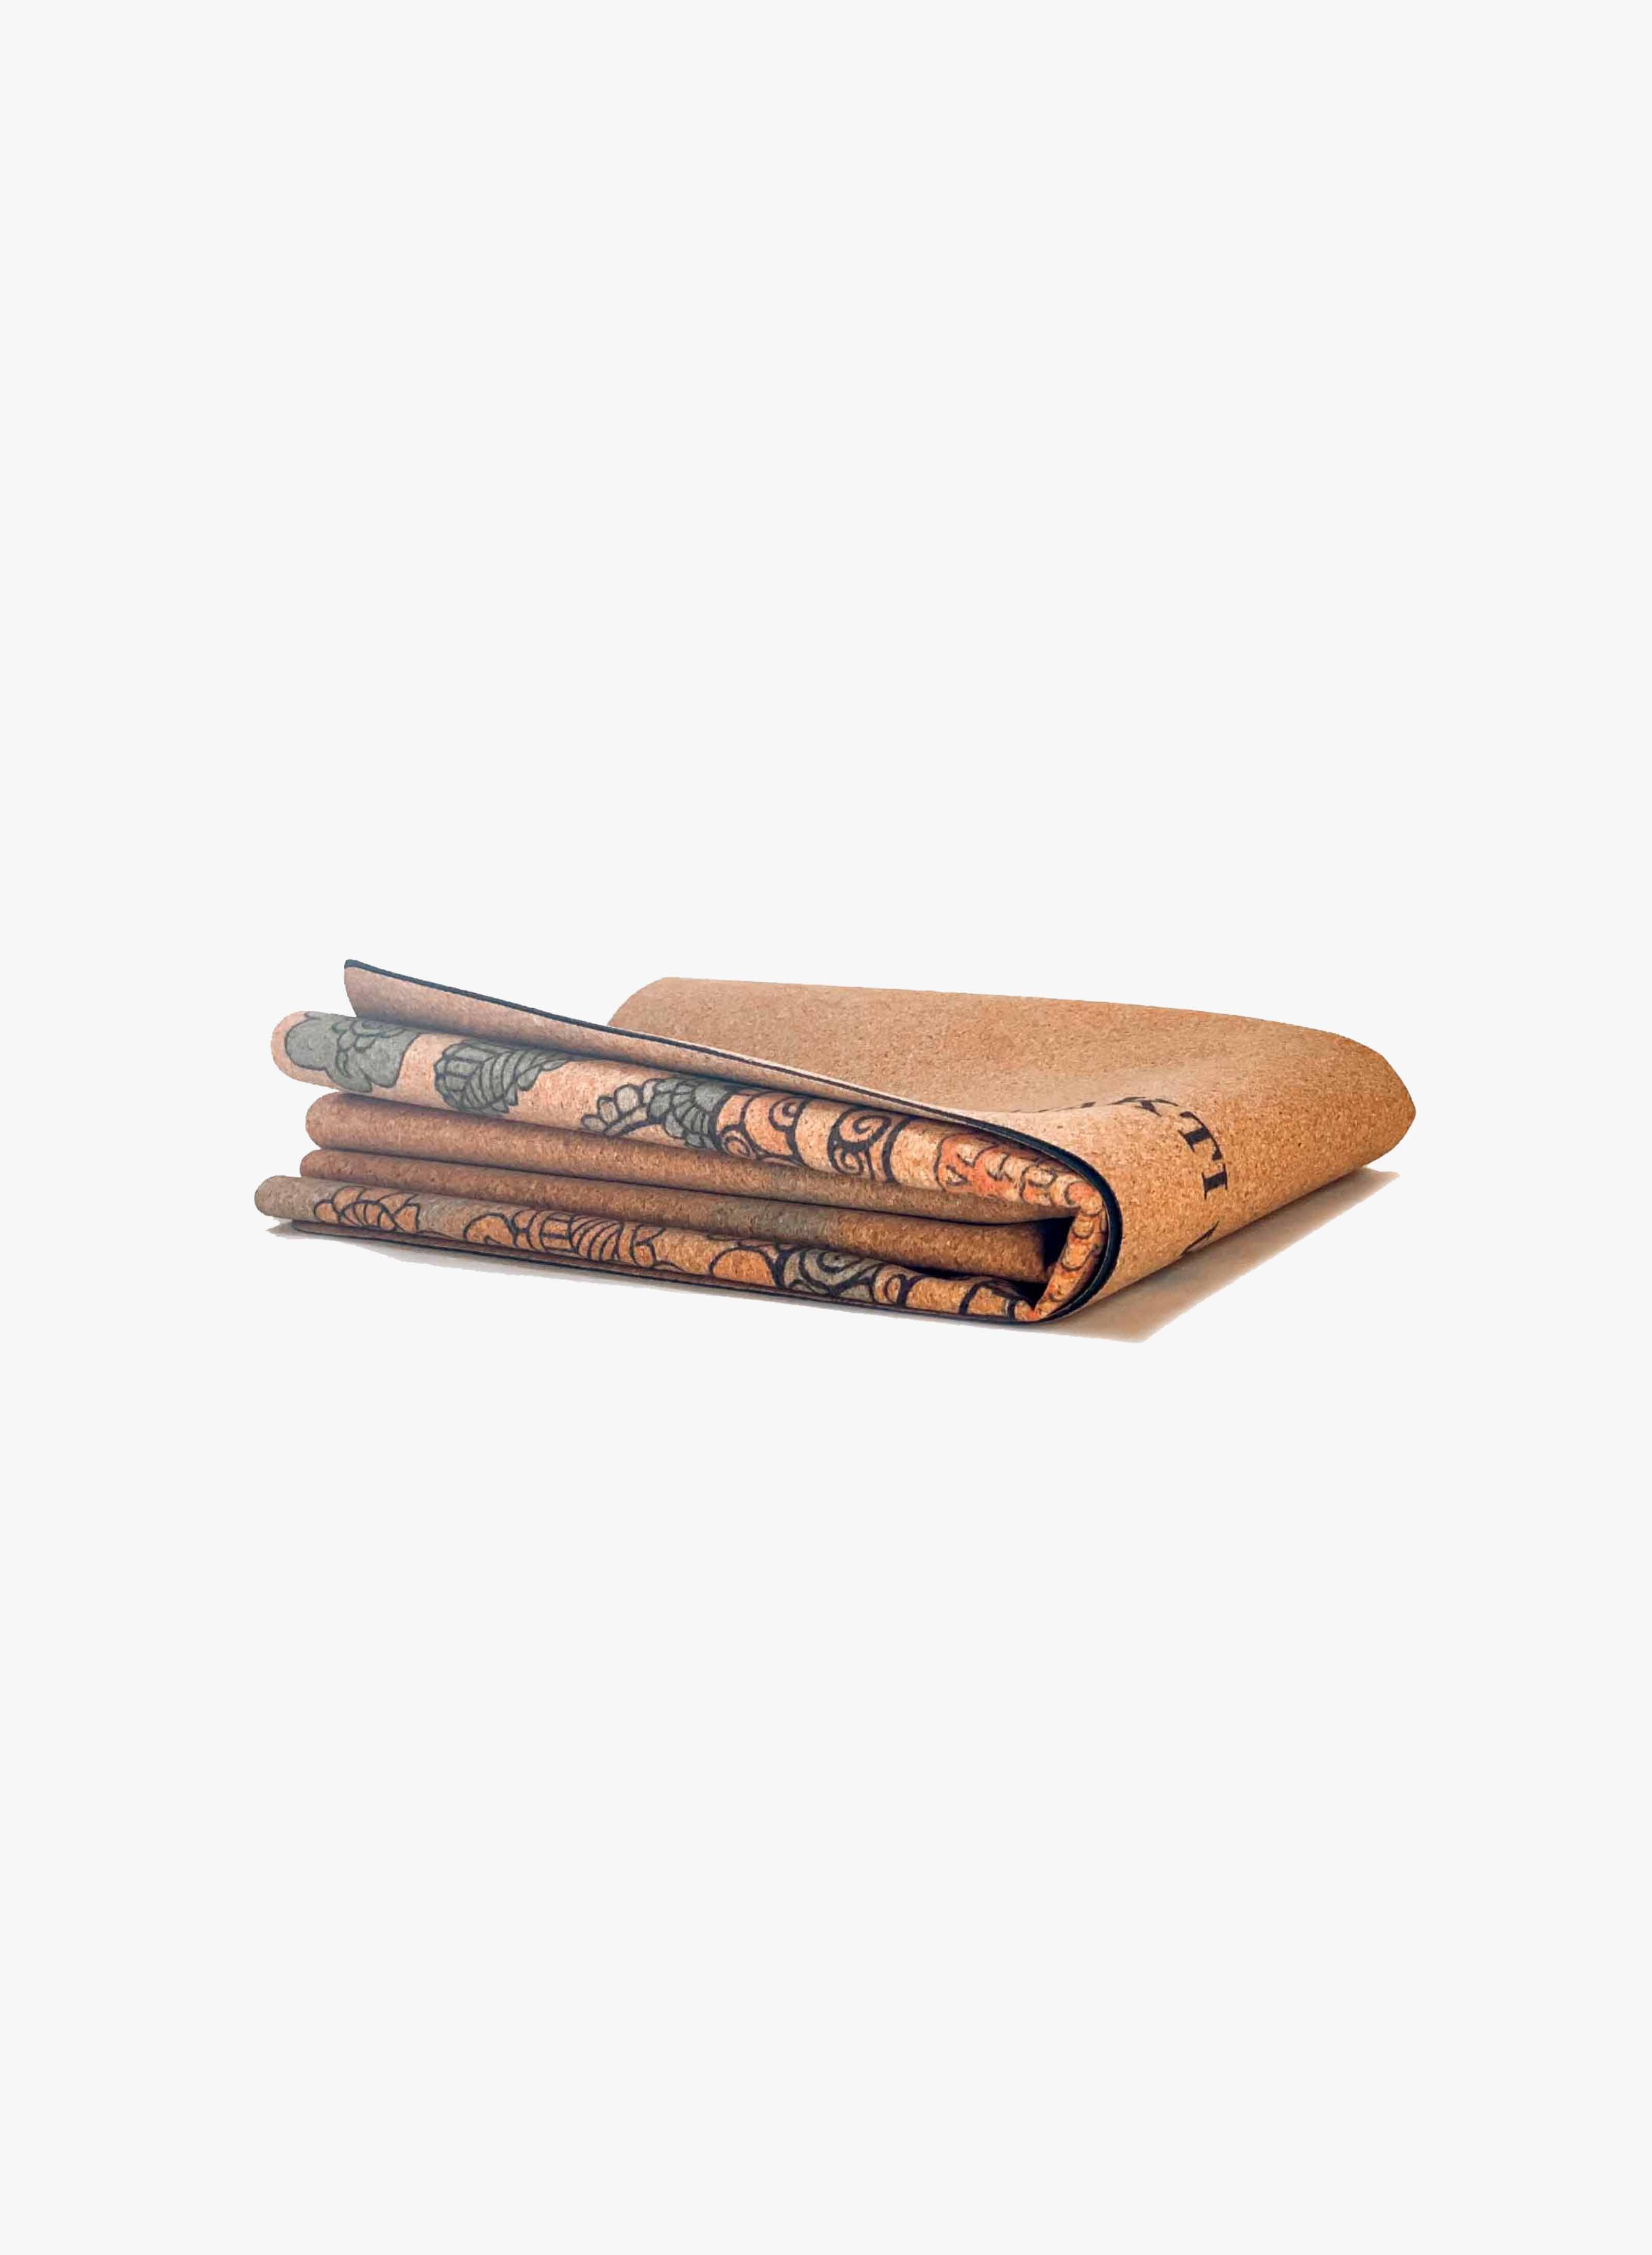 Shakti Warrior Elephant Design Cork Yoga Mat - Sustainable luxury for elevated practice. Handcrafted for grip and performance. Embrace the artistry of Shakti Warrior.